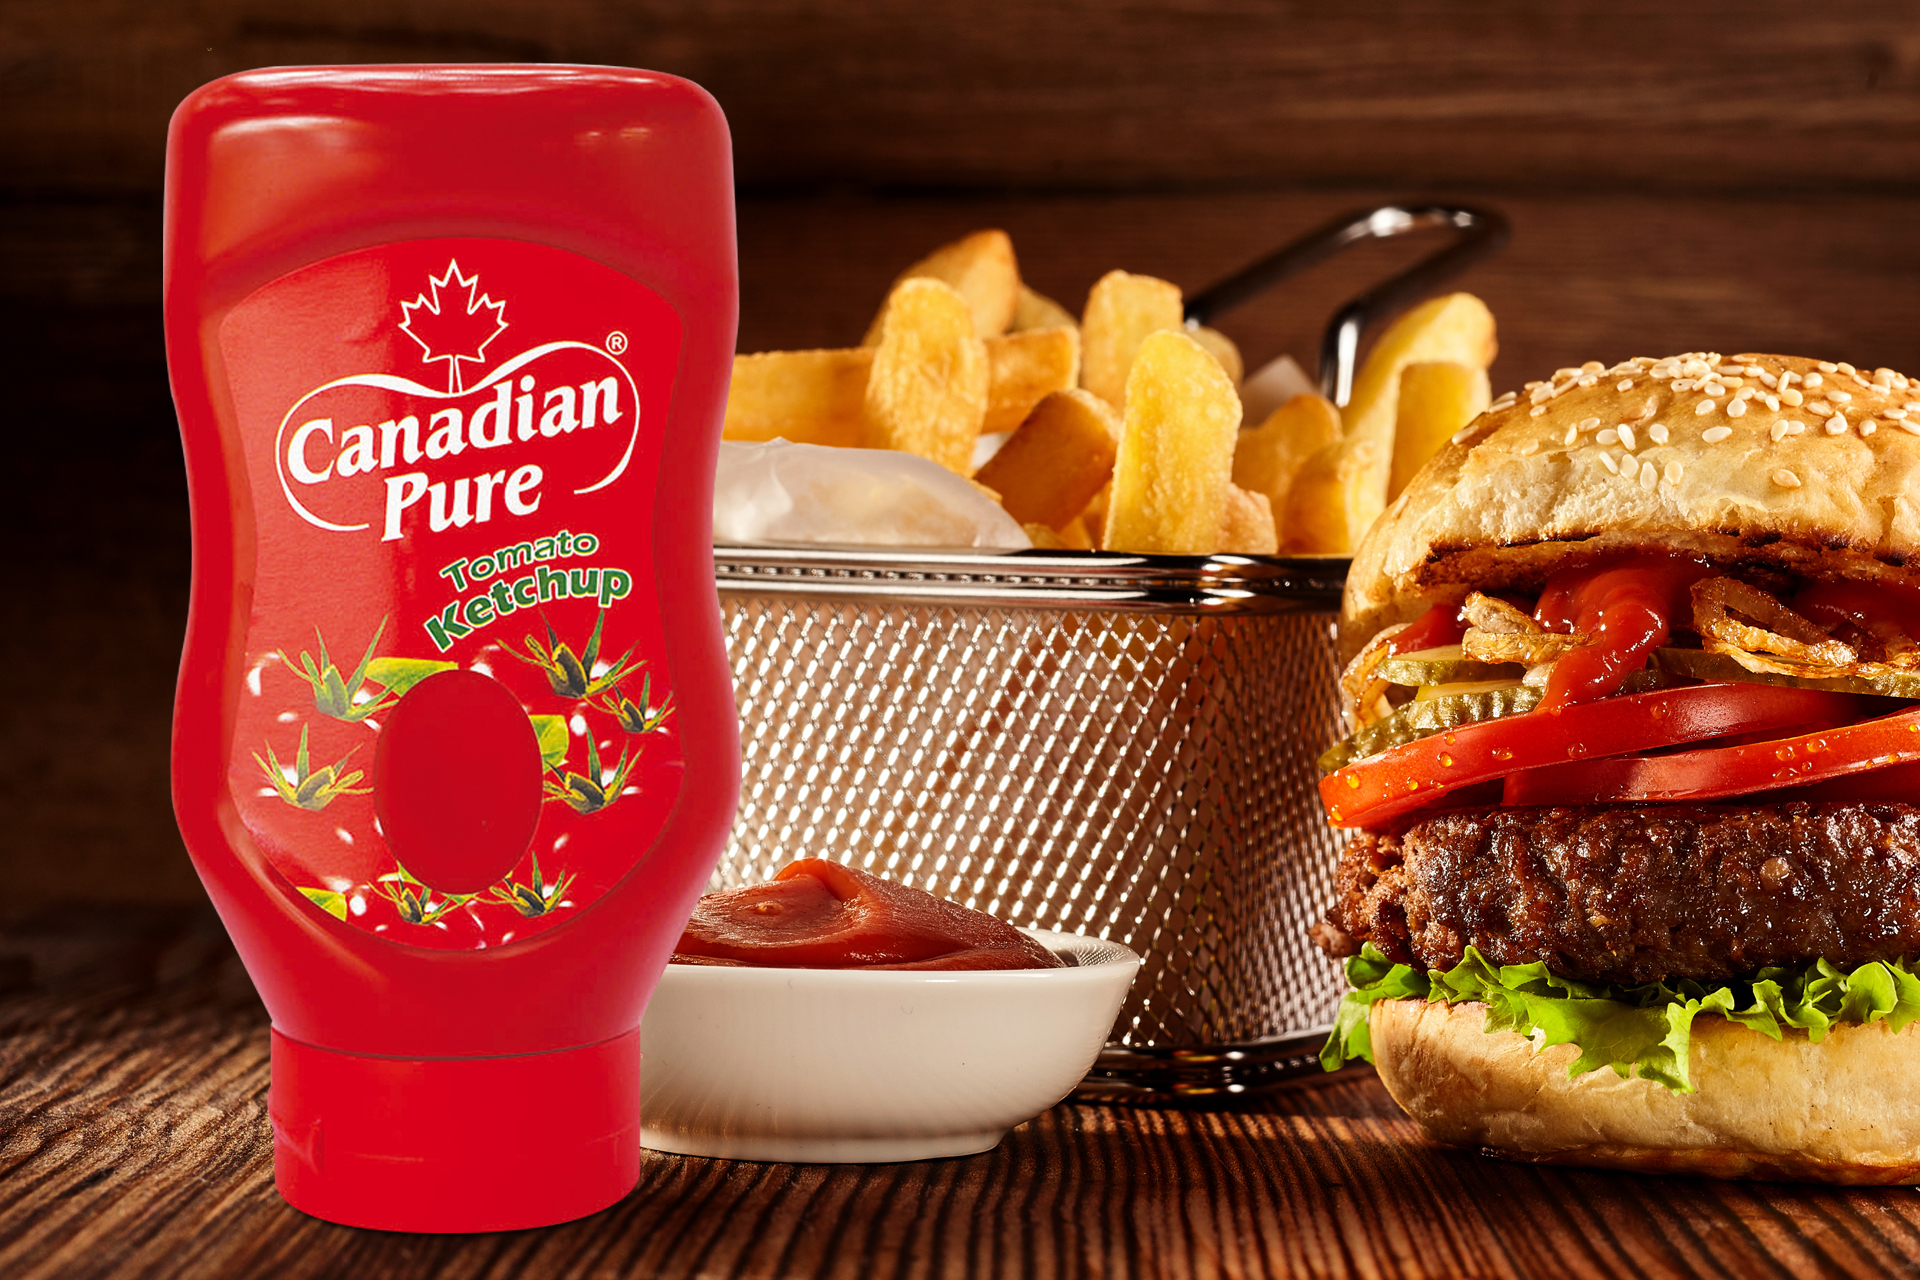 https://orbitsarl.com/wp-content/uploads/2017/09/Product-Food_CanadianPure-Ketchup-_1920x1280-FIN.jpg